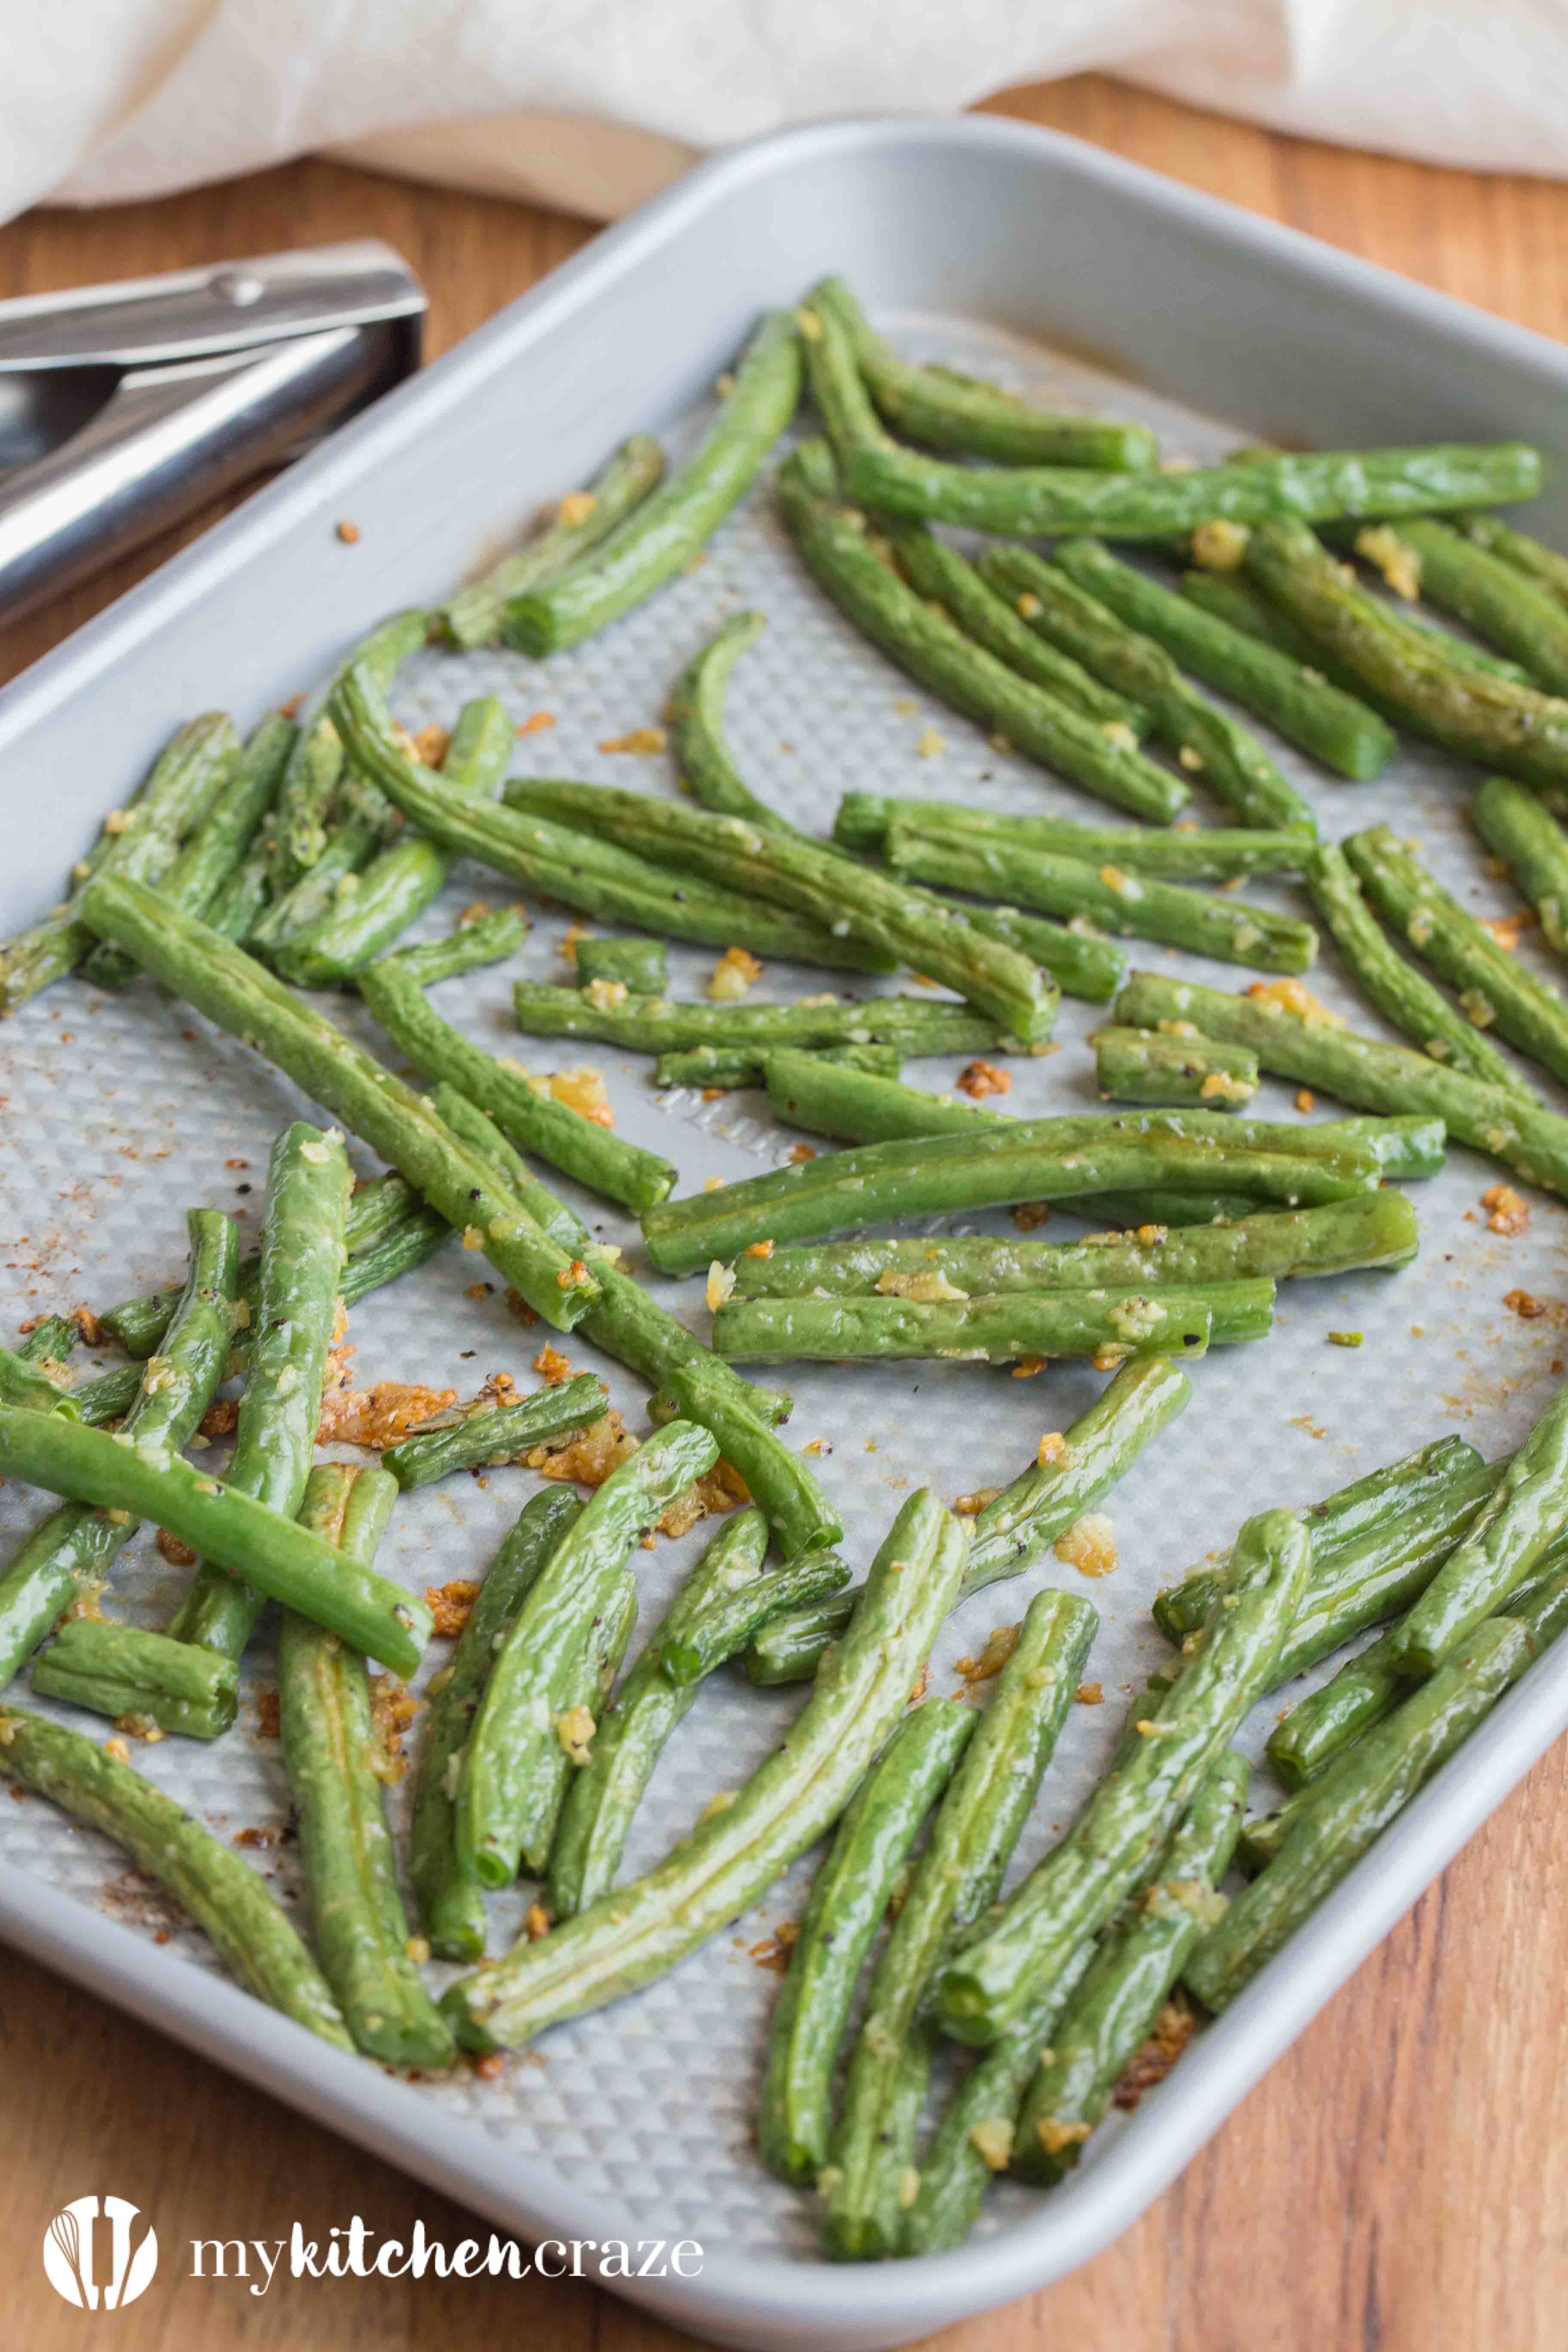 Baked Garlic Green Beans with a Recipe Video - My Kitchen Craze